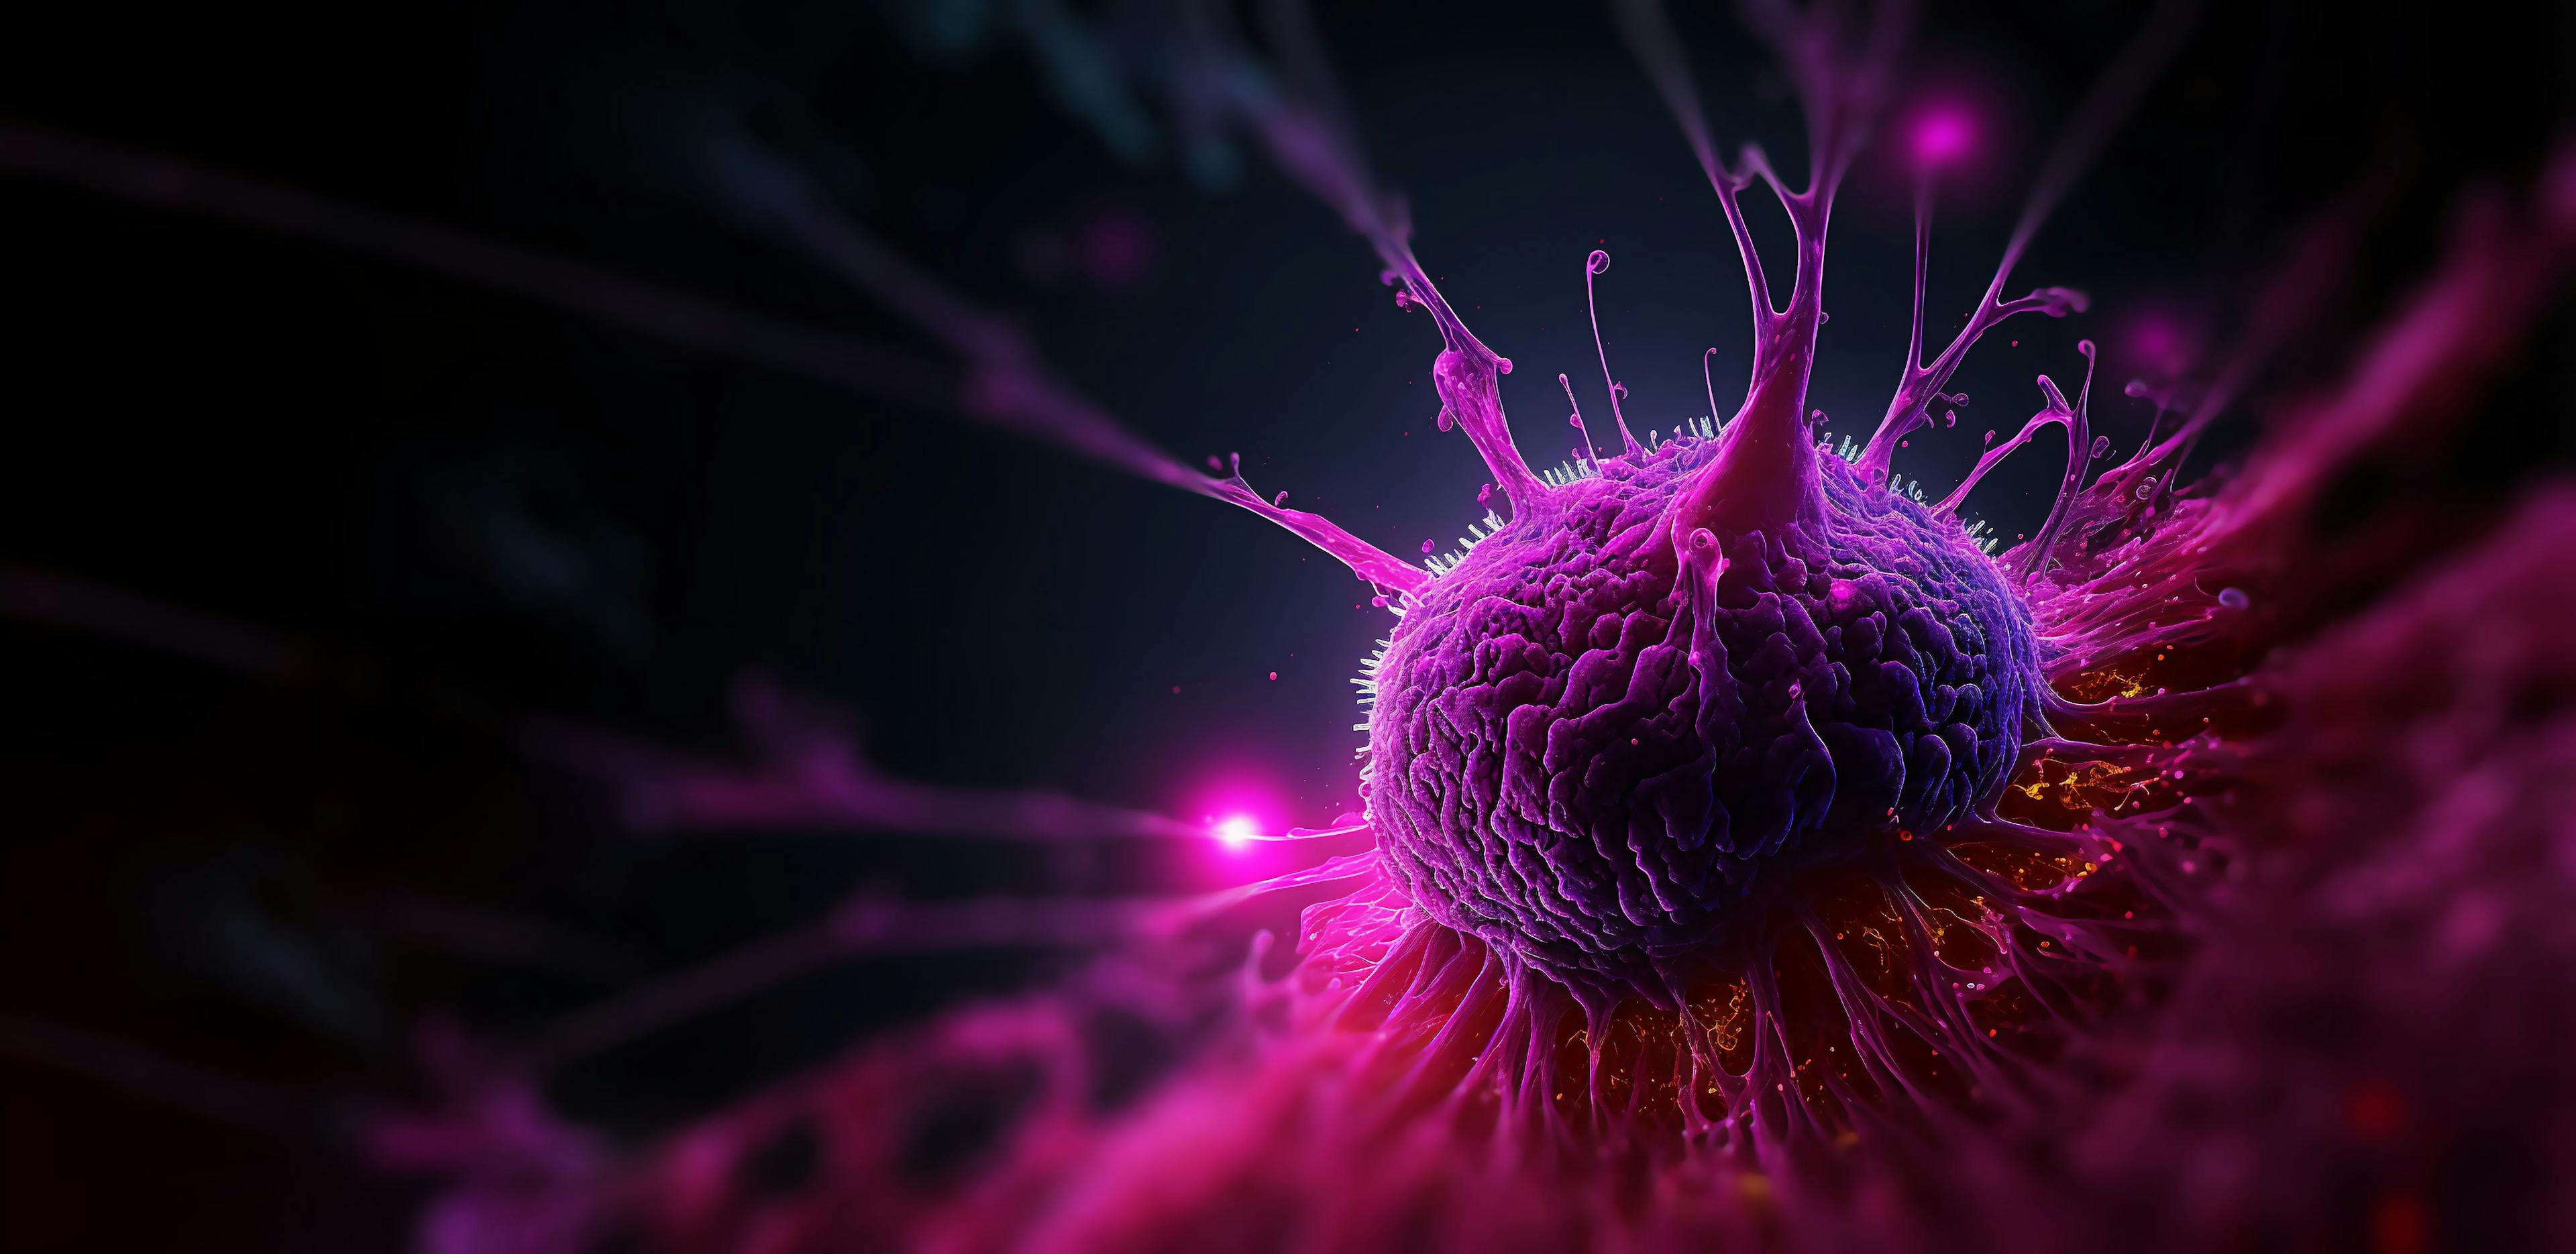 3D rendering of tumor microenvironment concept with cancer cells: © catalin - stock.adobe.com